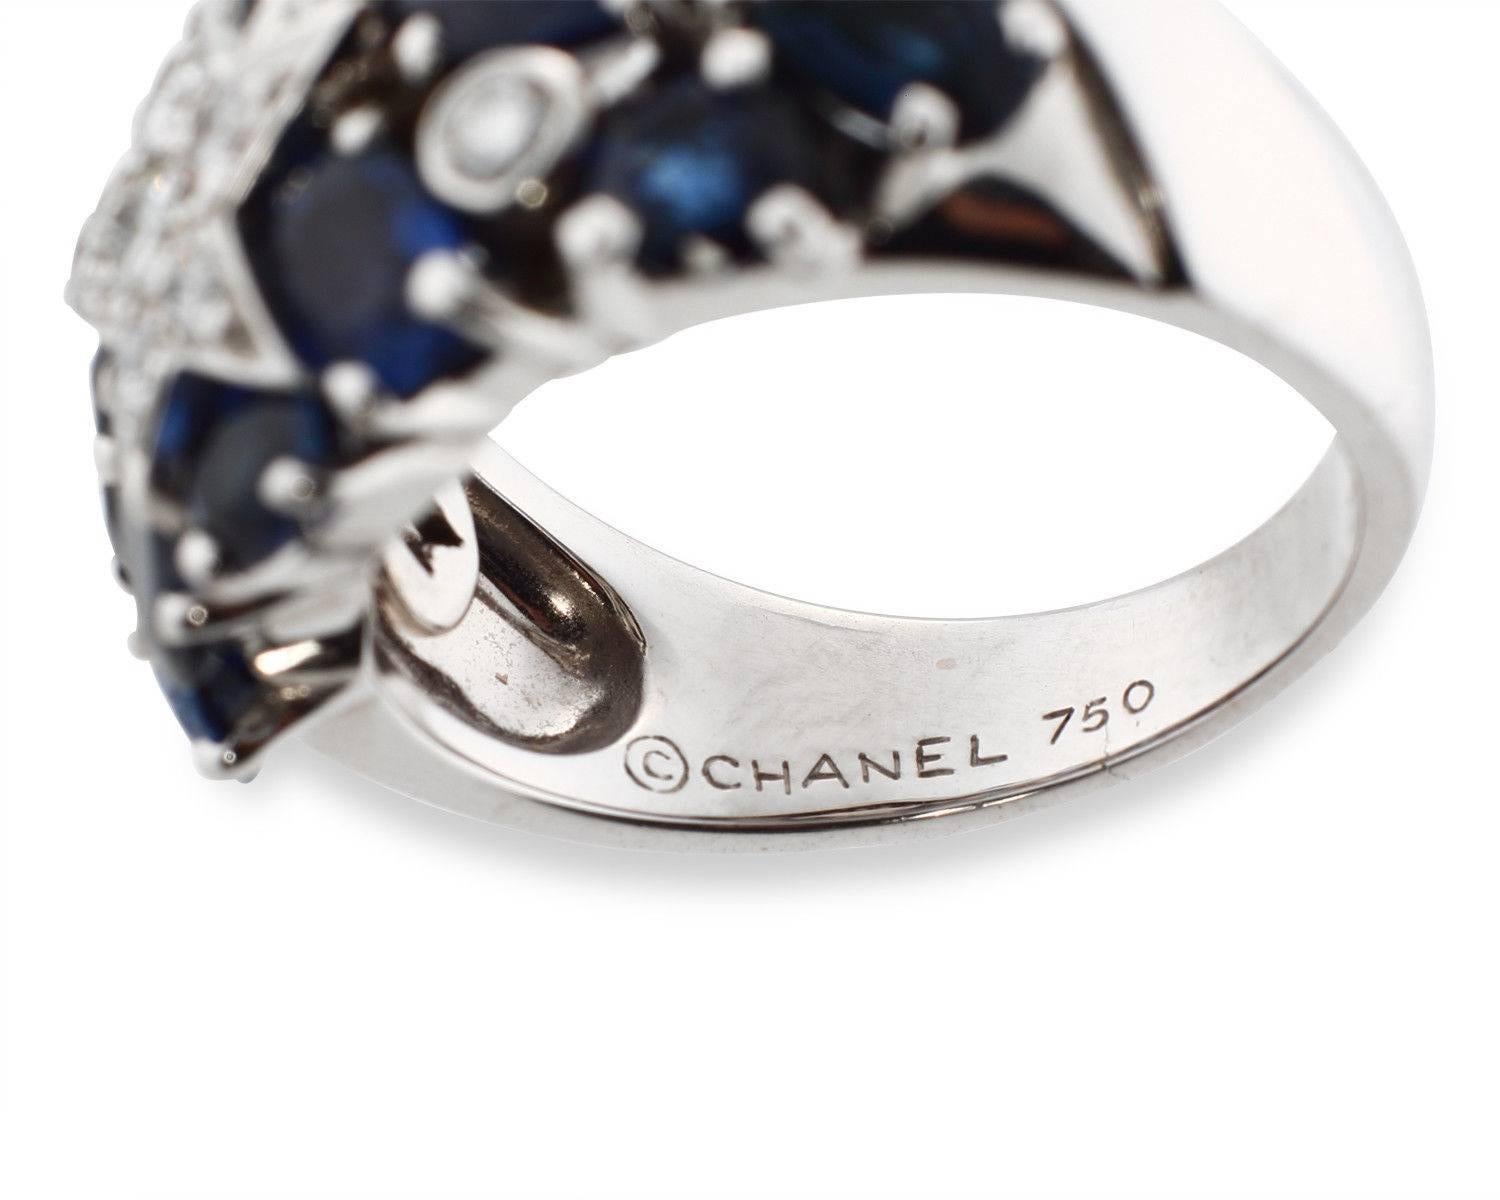 Adorn a sensational Chanel ring to your finger from the Comete Collection and we guarantee all eyes wil be on you! This ring comes in a gorgeous star comet shape and feature an array of sapphires and diamonds. It will serve as the perfect accessory